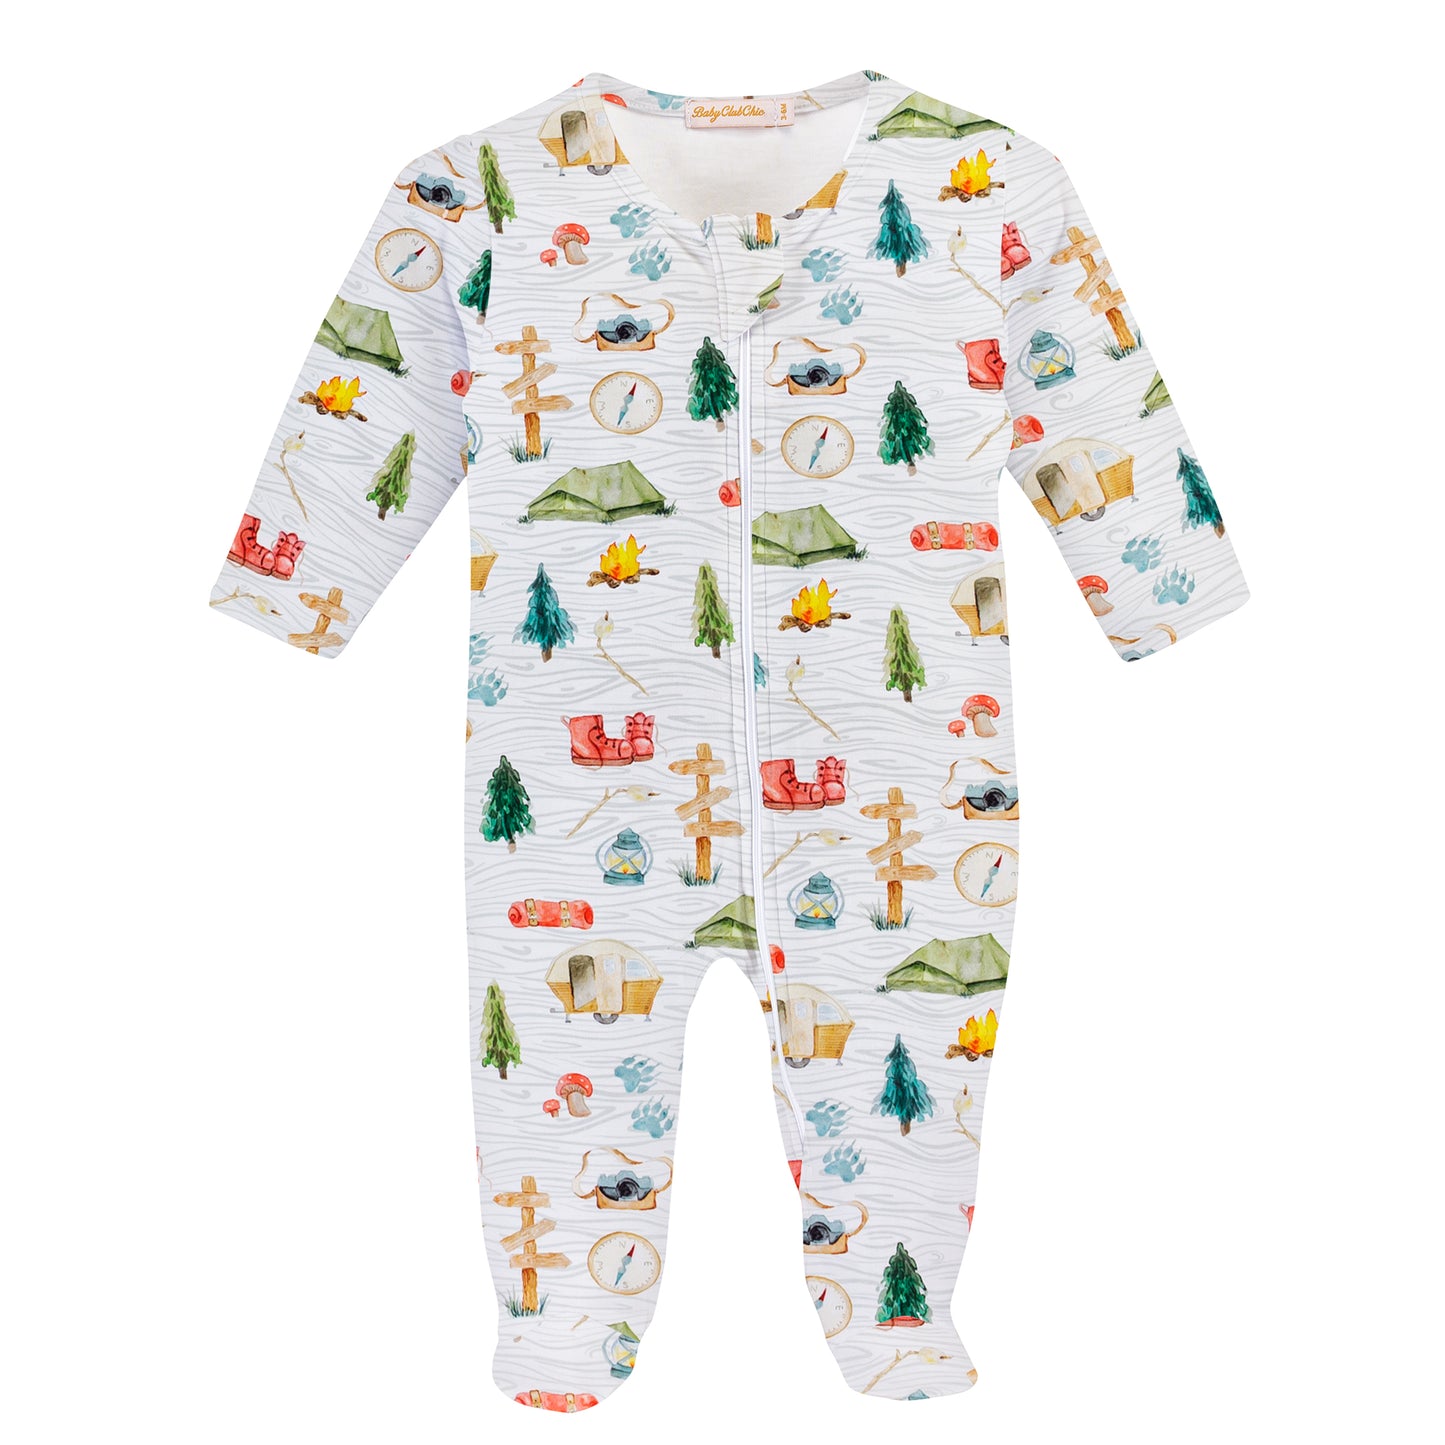 Baby Club Chic - Camping Zipped Footie